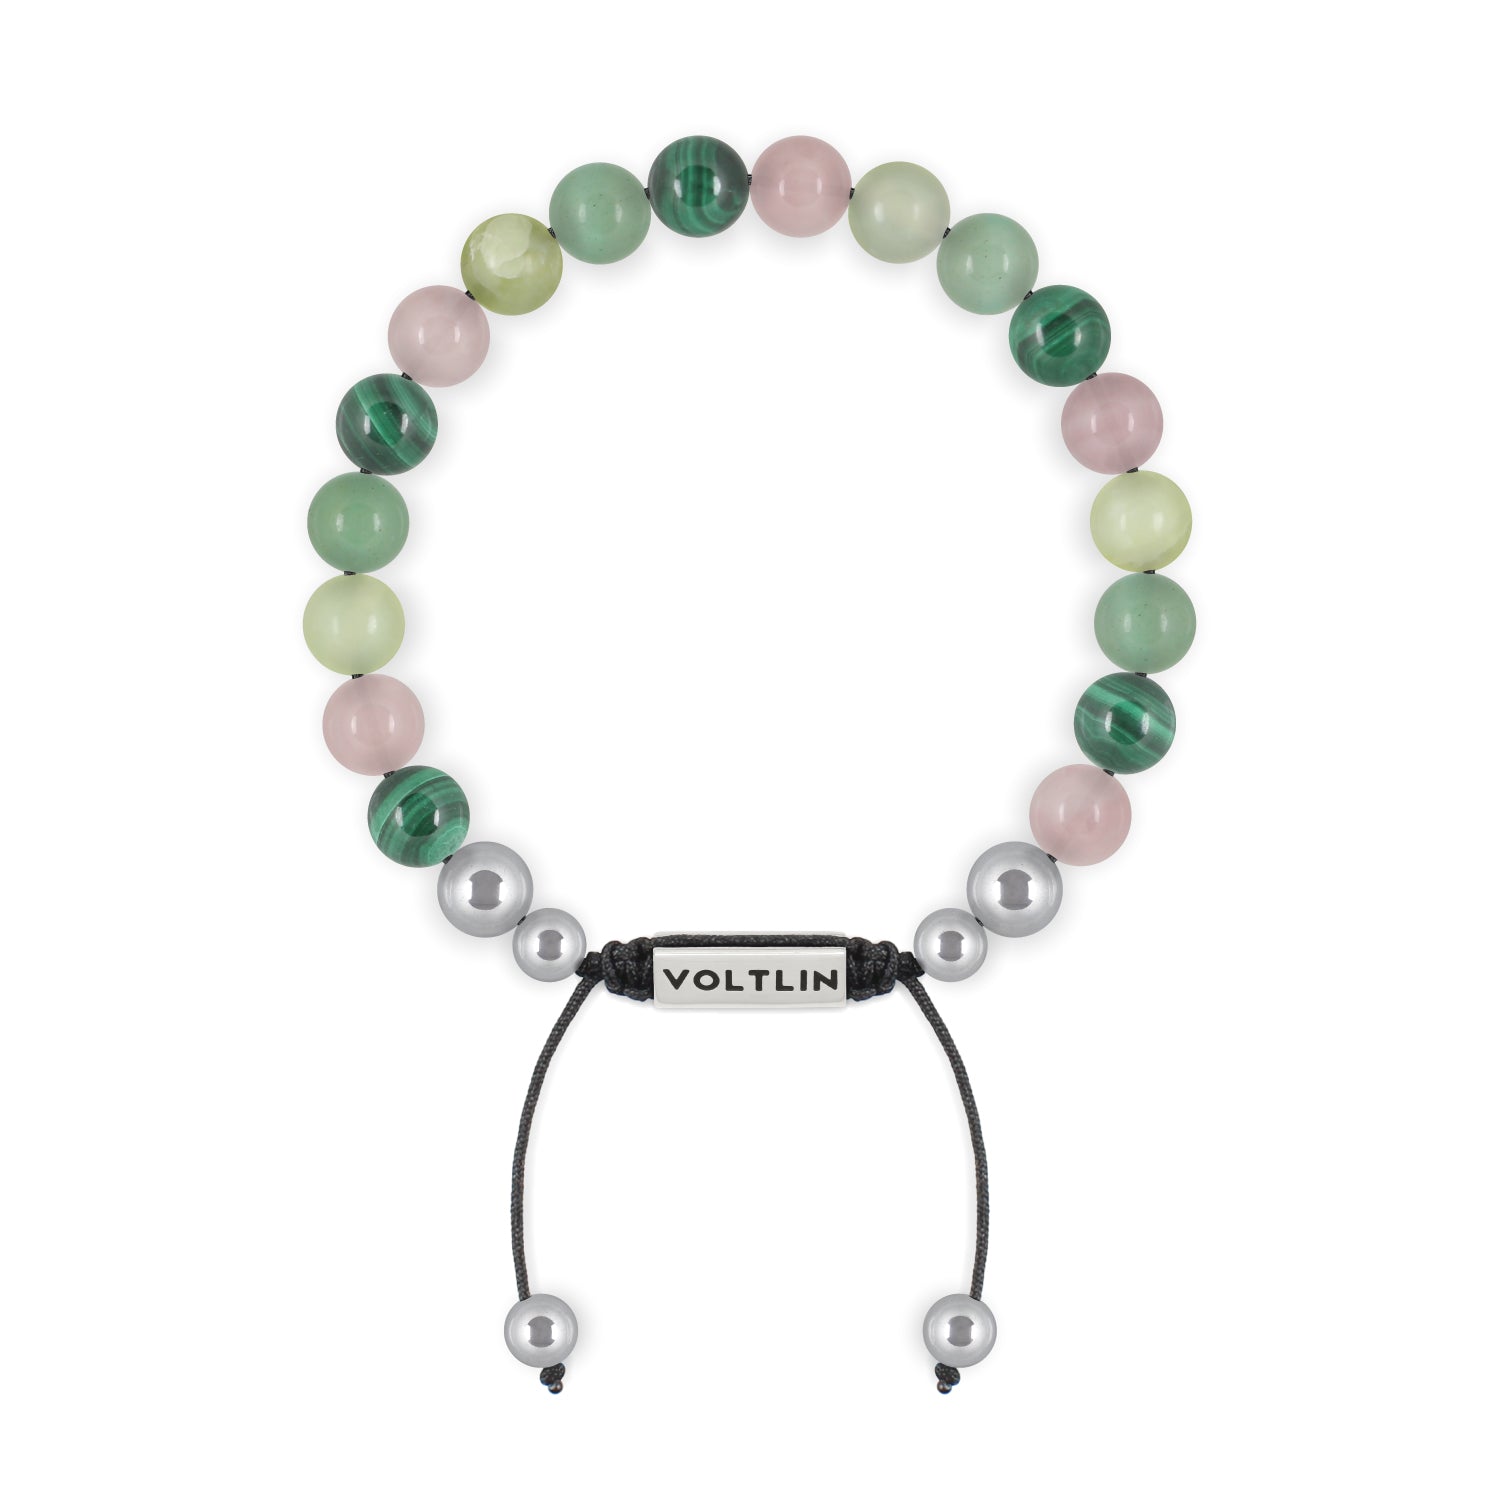 Front view of an 8mm Heart Chakra beaded shamballa bracelet featuring Malachite, Rose Quartz, Jade, & Green Aventurine crystal and silver stainless steel logo bead made by Voltlin